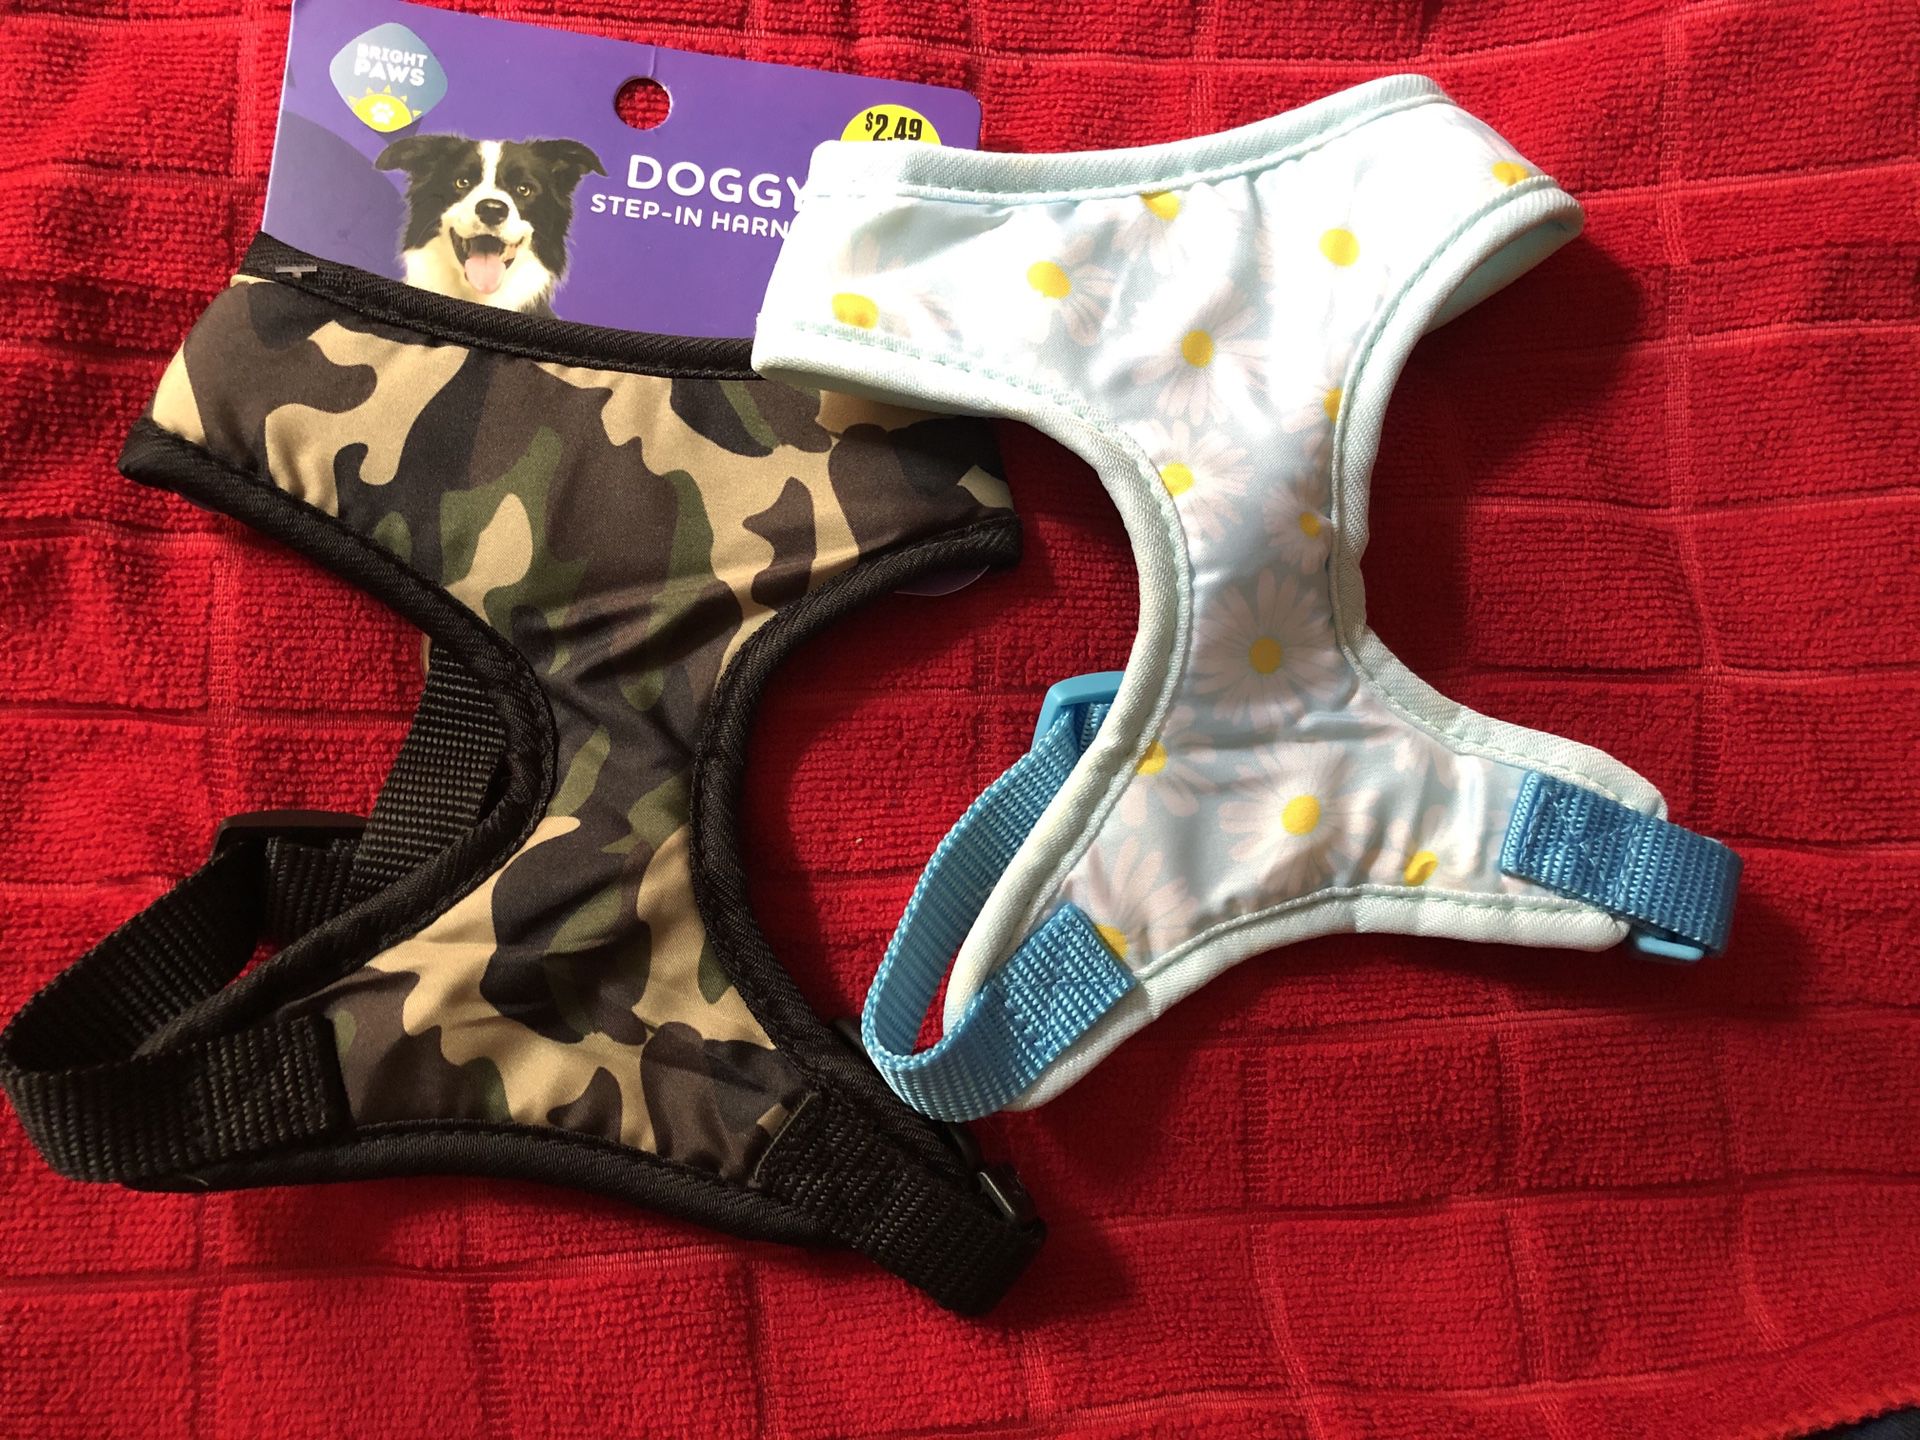 Camo and floral dog harness